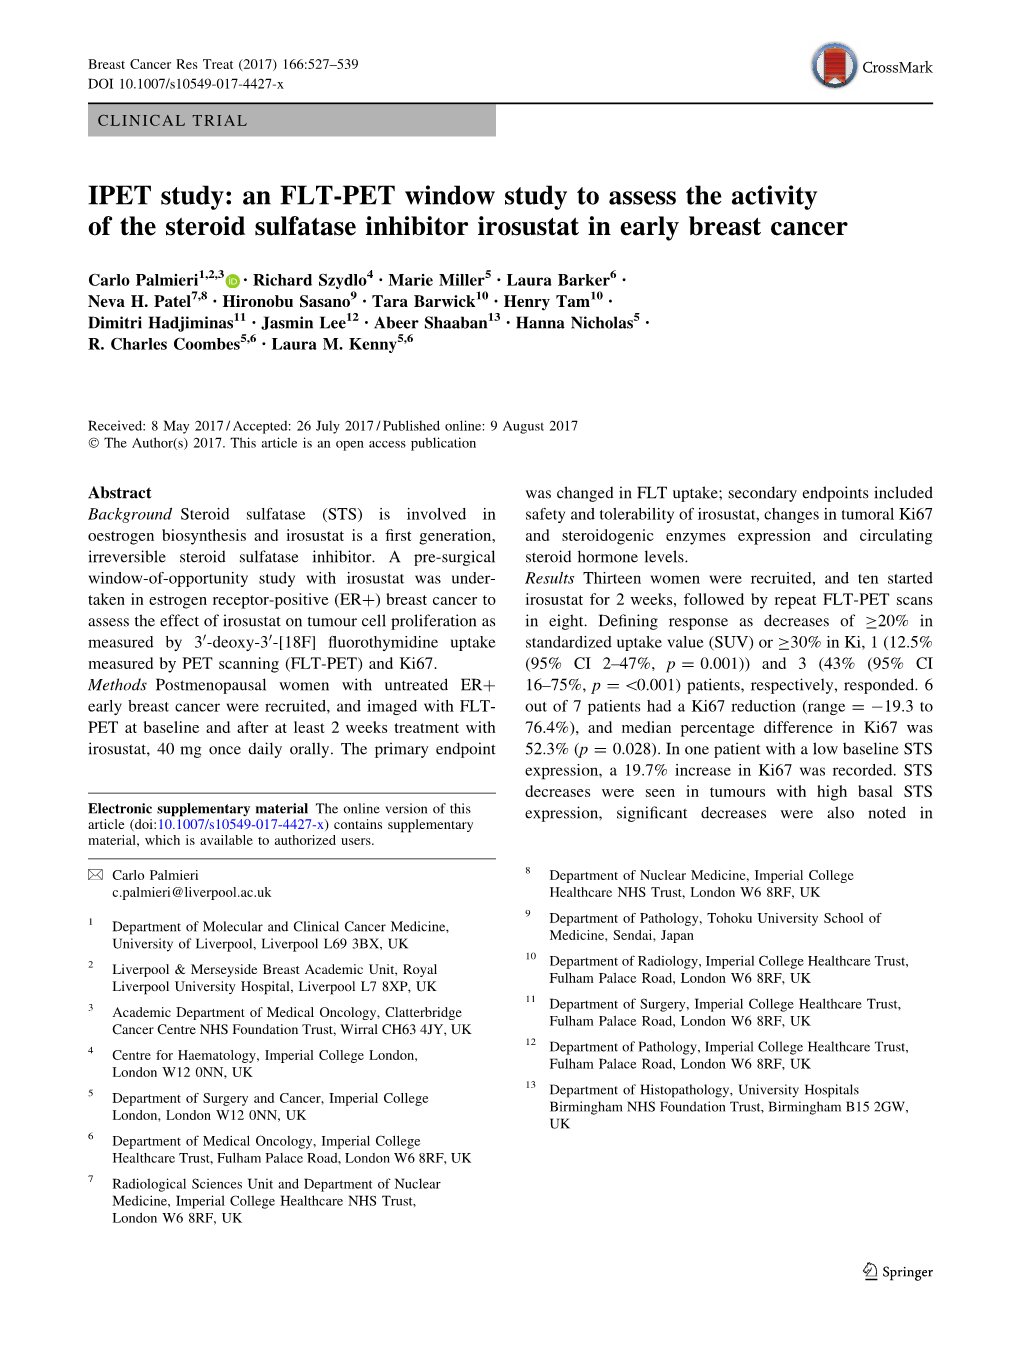 IPET Study: an FLT-PET Window Study to Assess the Activity of the Steroid Sulfatase Inhibitor Irosustat in Early Breast Cancer